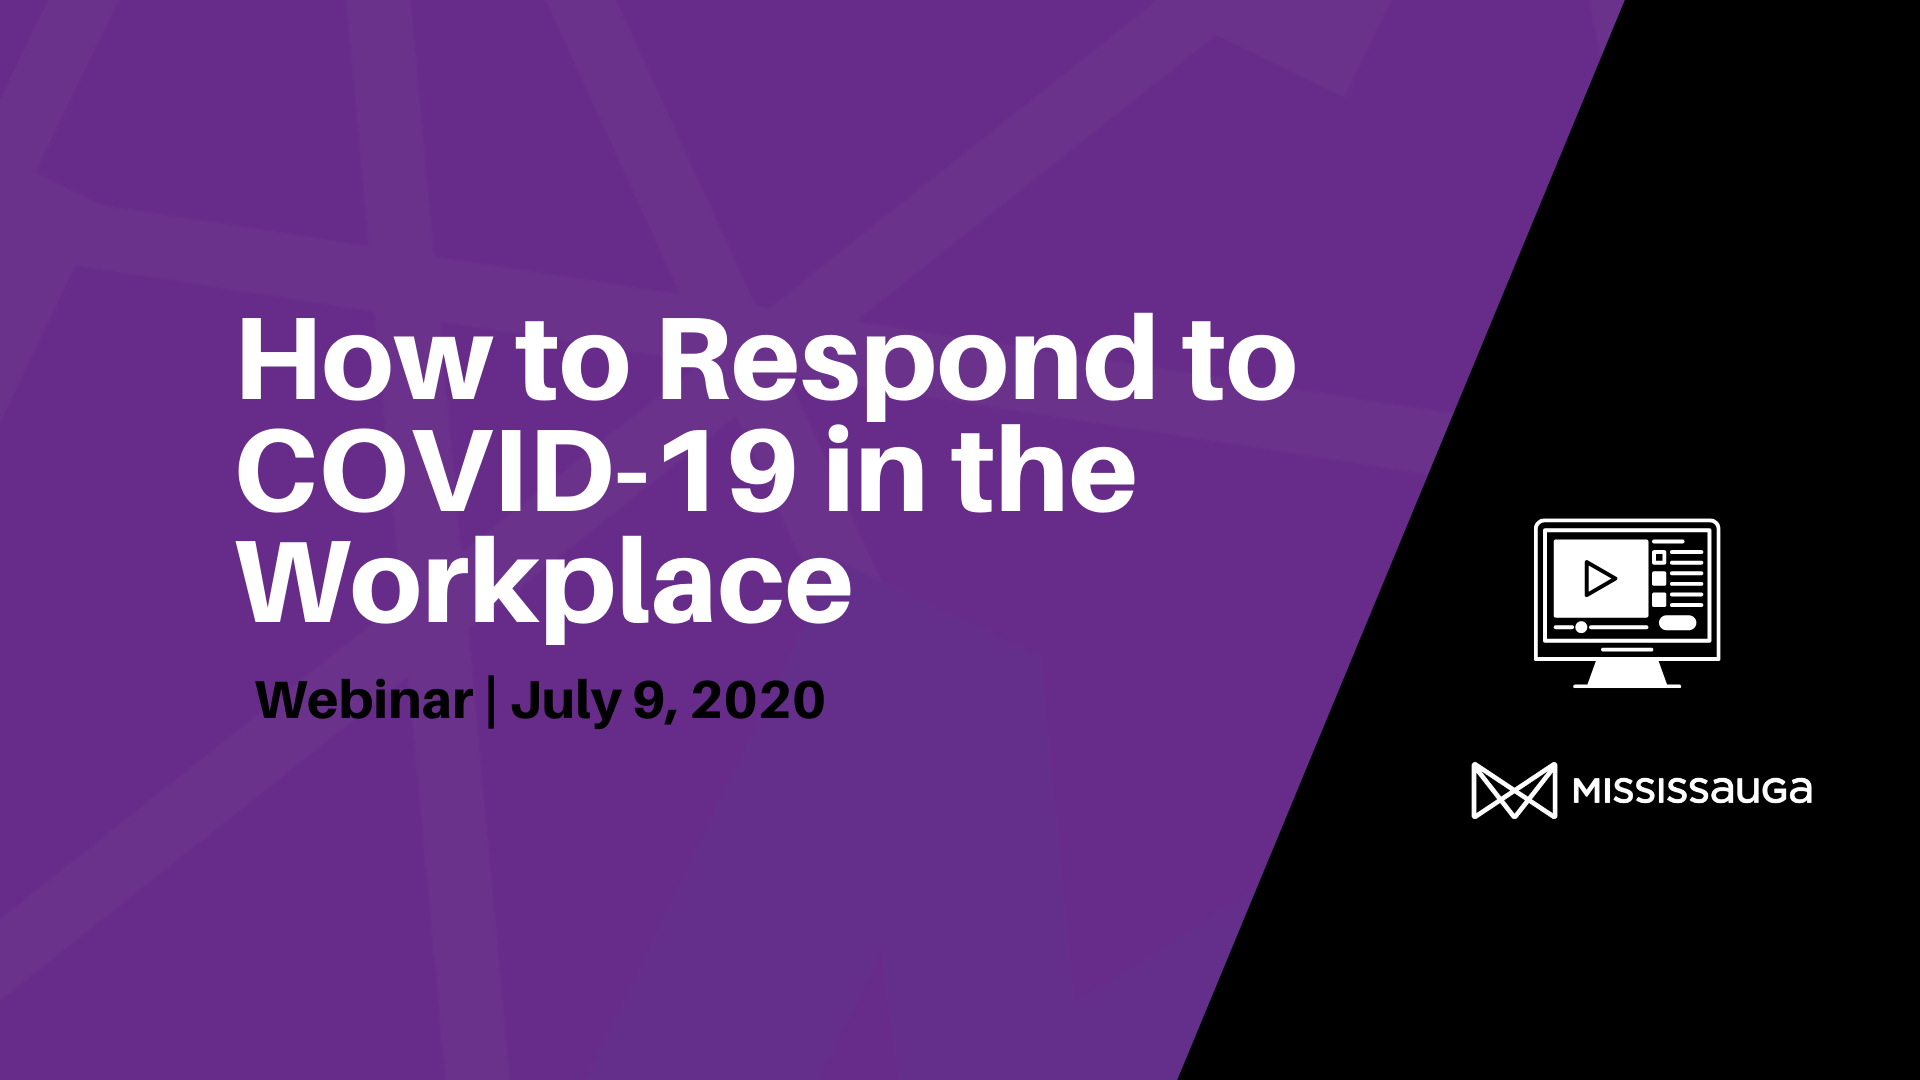 How to Respond to COVID-19 in the Workplace – Webinar, Jul 9